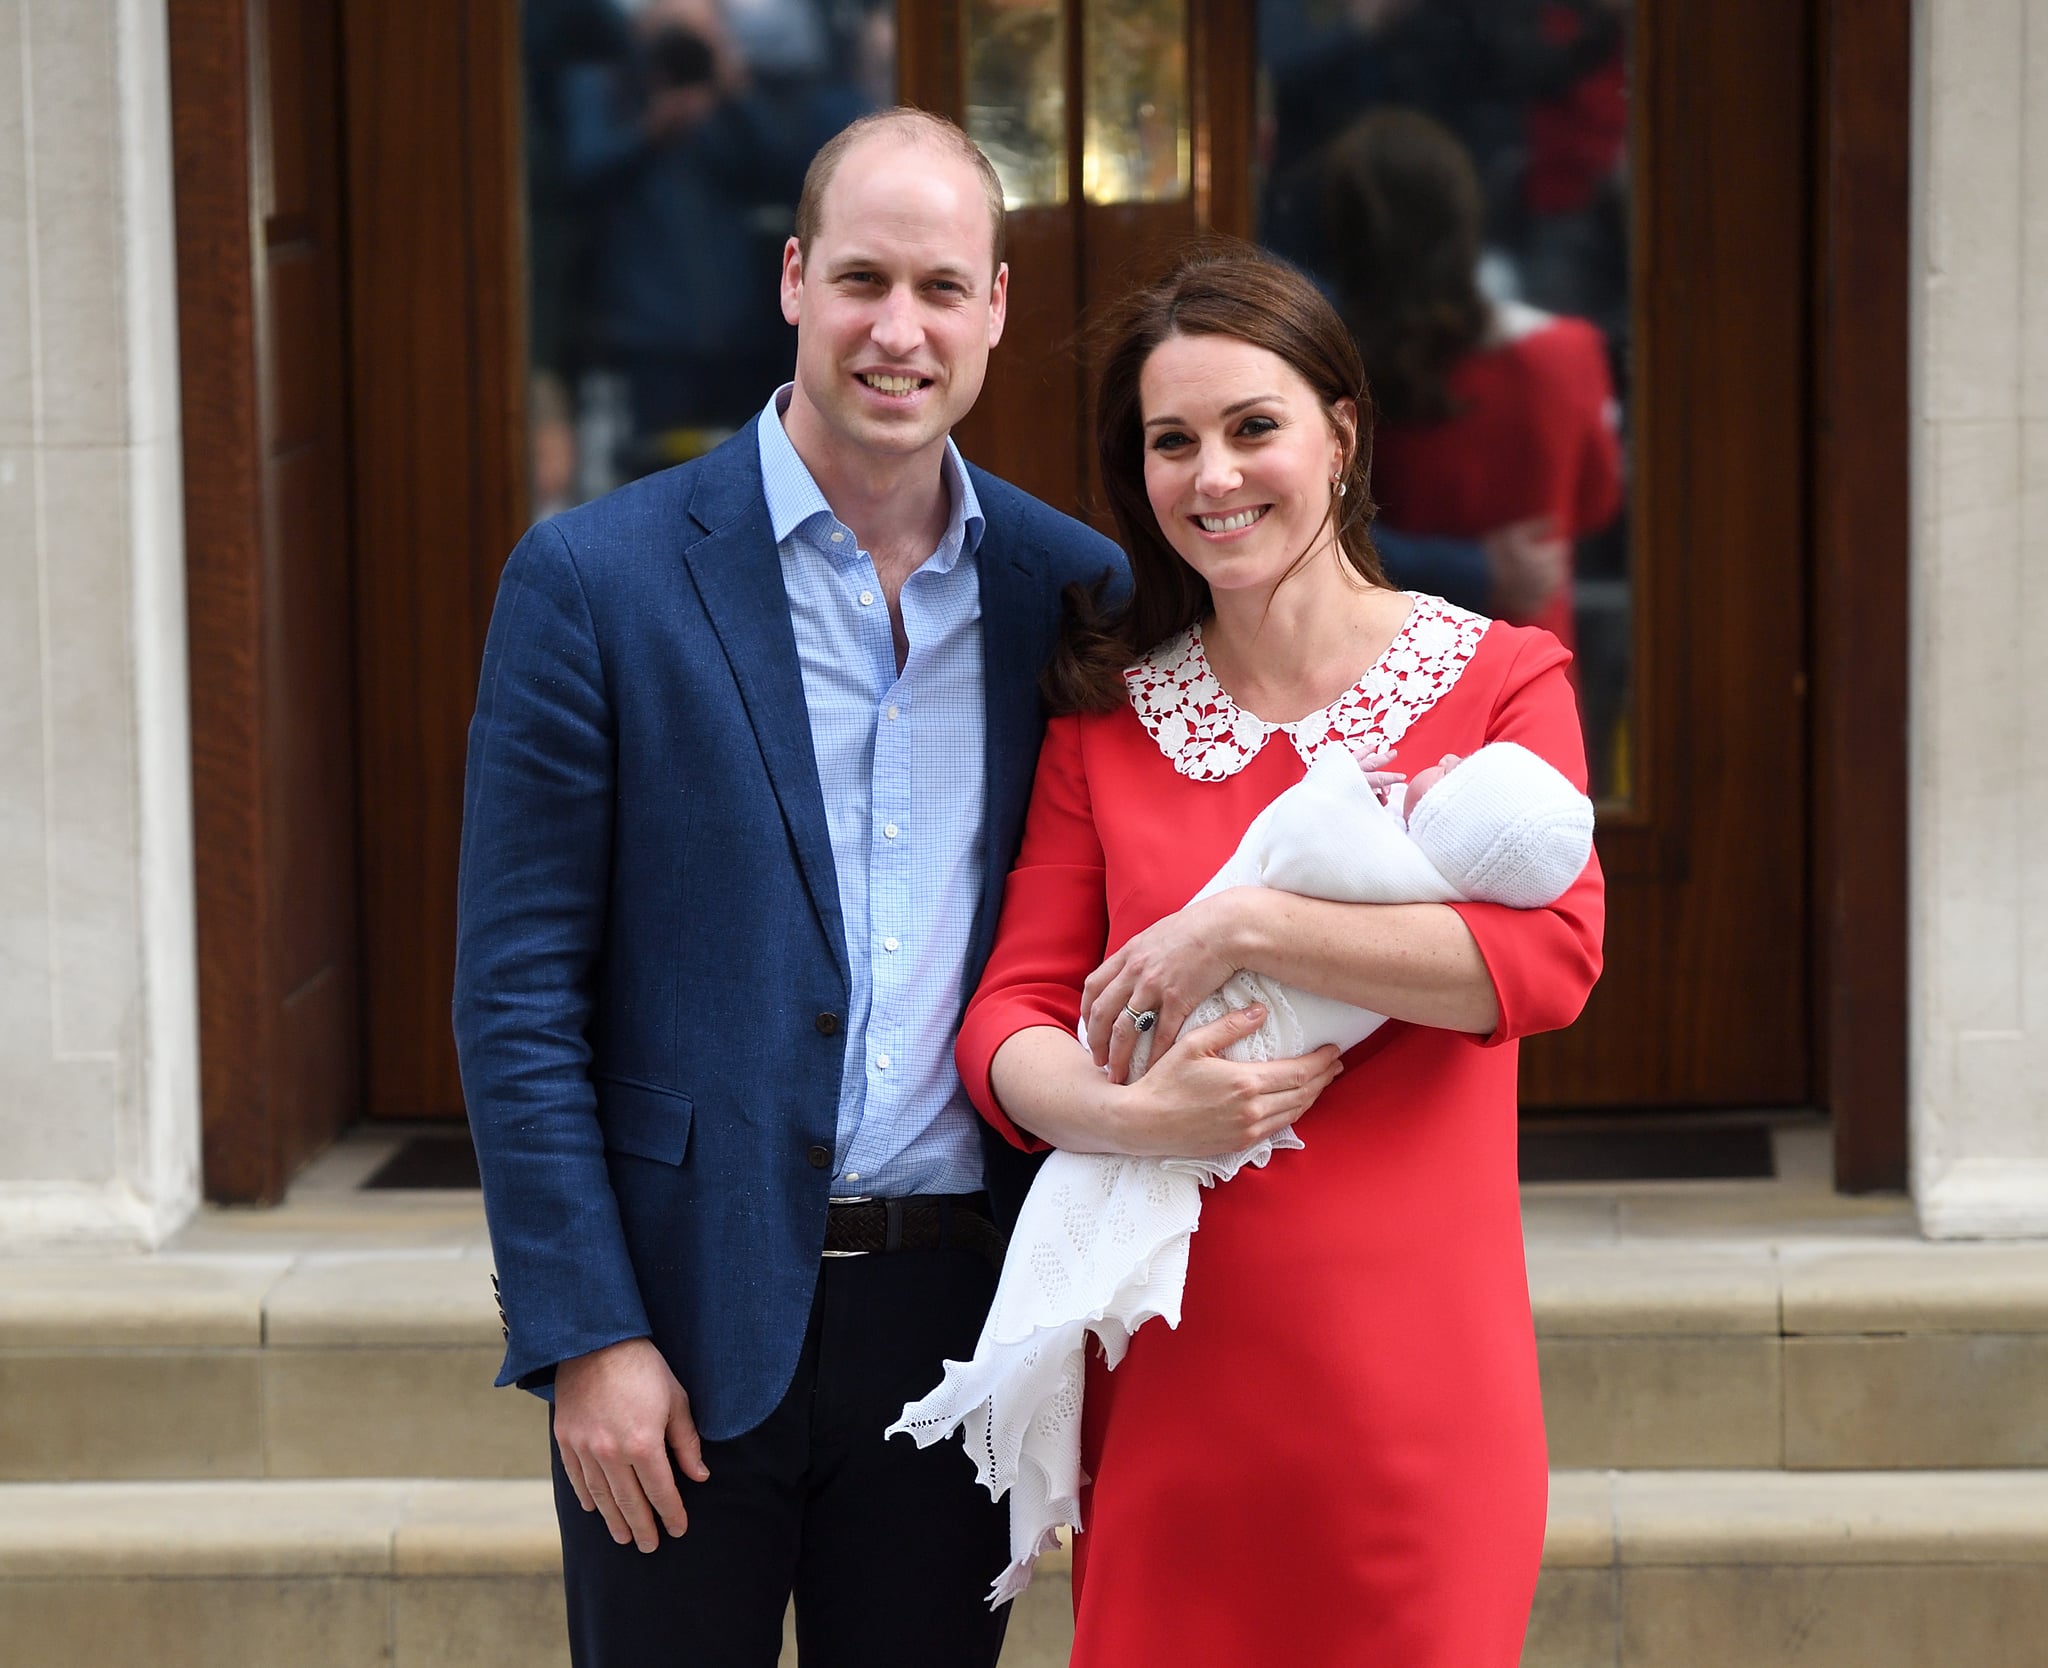 LONDON, ENGLAND - APRIL 23:  Catherine, Duchess of Cambridge and Prince William, Duke of Cambridge depart the Lindo Wing with their newborn son at St Mary's Hospital on April 23, 2018 in London, England. The Duchess safely delivered a boy at 11:01 am, weighing 8lbs 7oz, who will be fifth in line to the throne.  (Photo by Karwai Tang/WireImage)